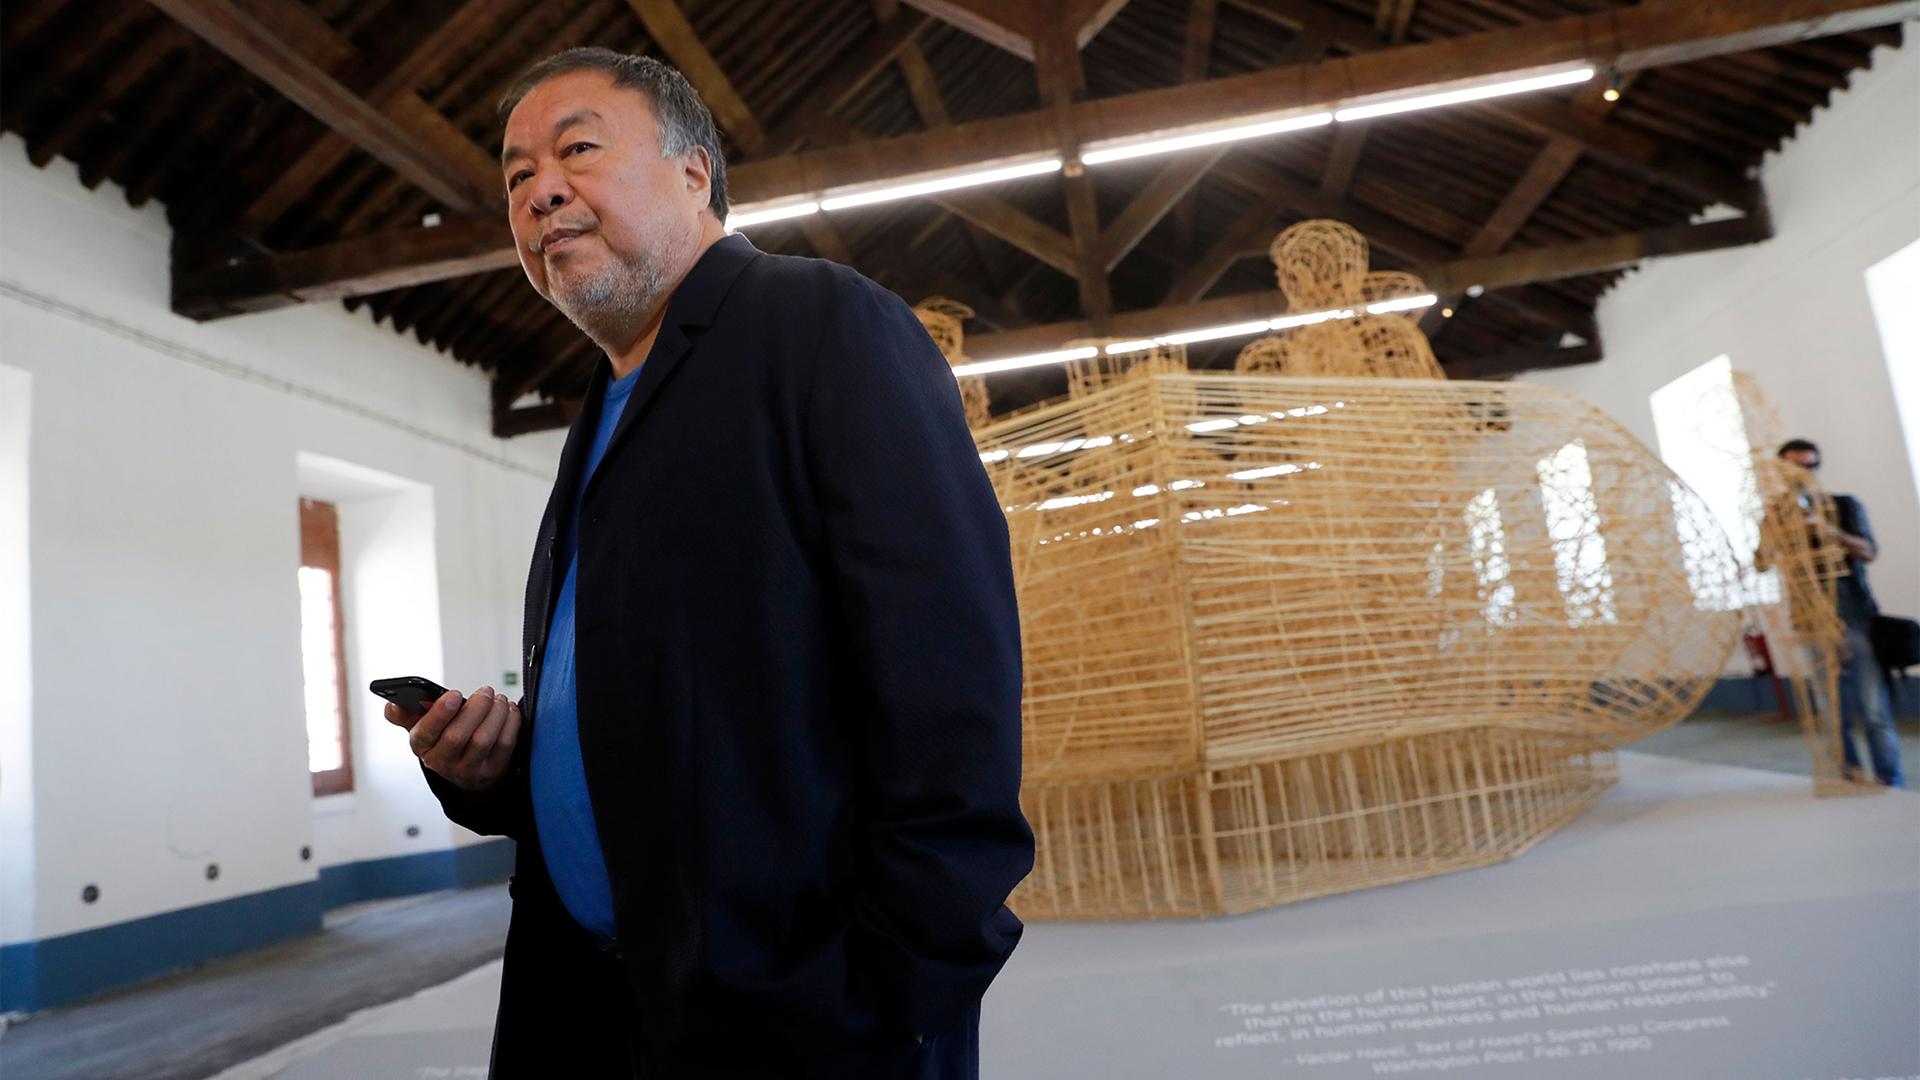 Dissident Chinese artist Ai Weiwei walks by his work 